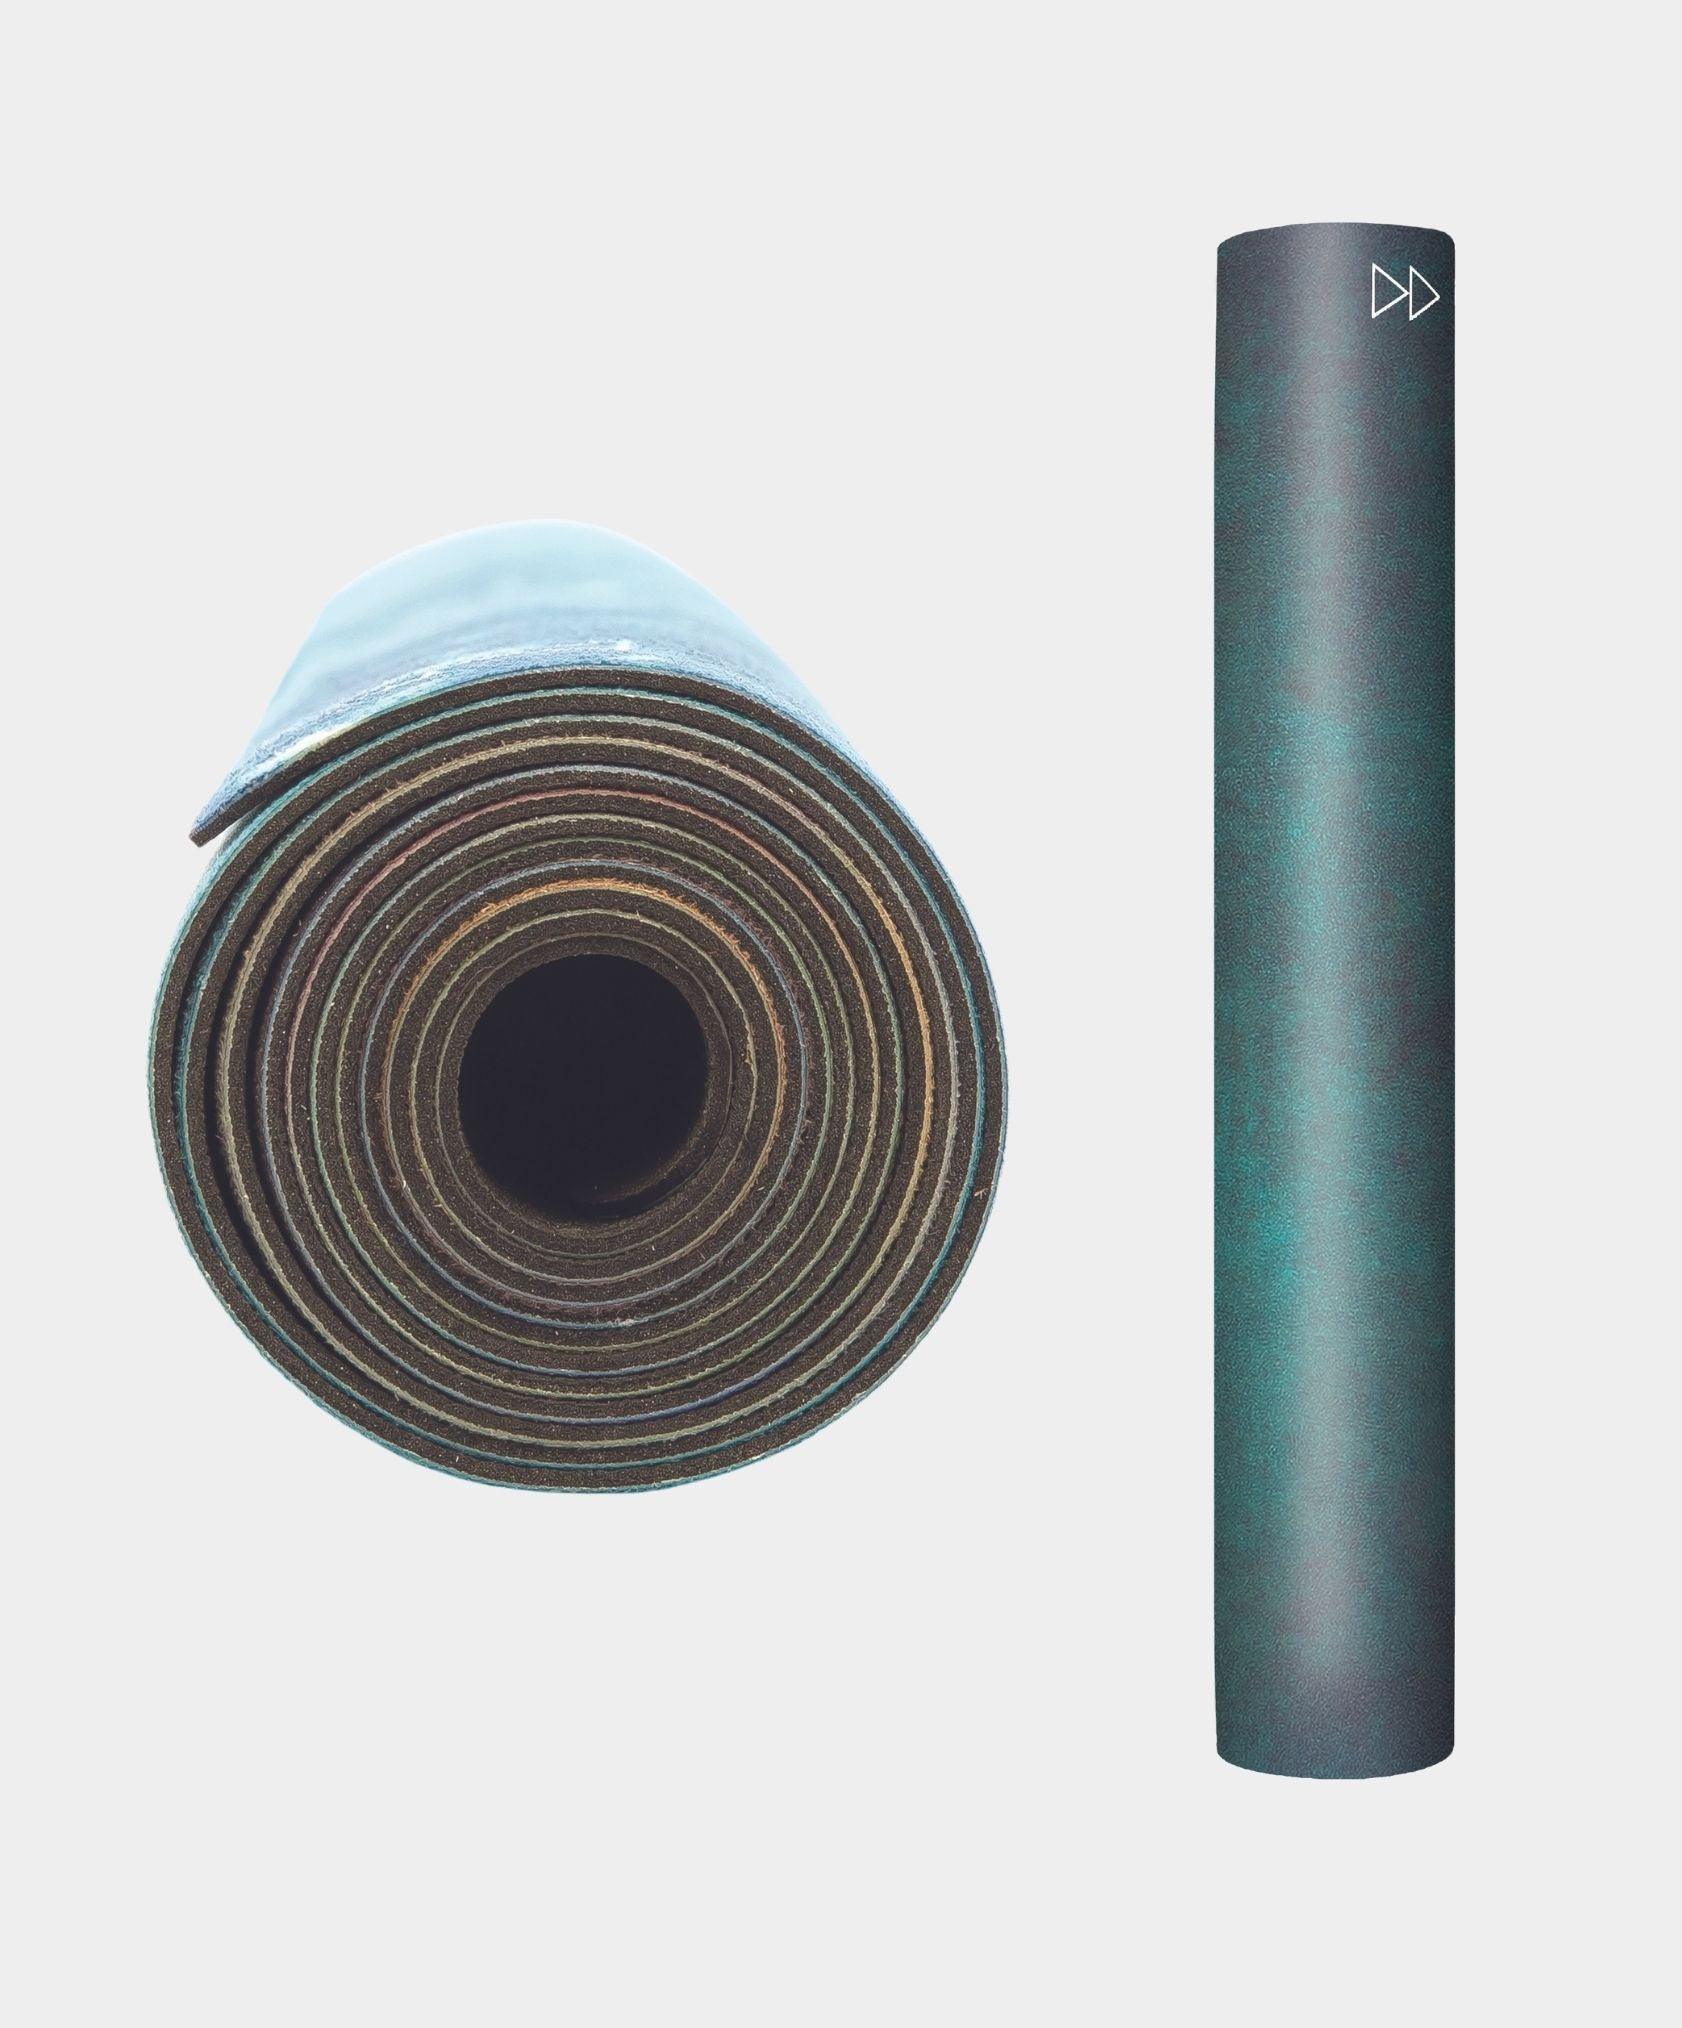 YDL Combo Travel Yoga Mat - 2-in-1 (Mat + Towel) 1.5 mm - Best For Travel